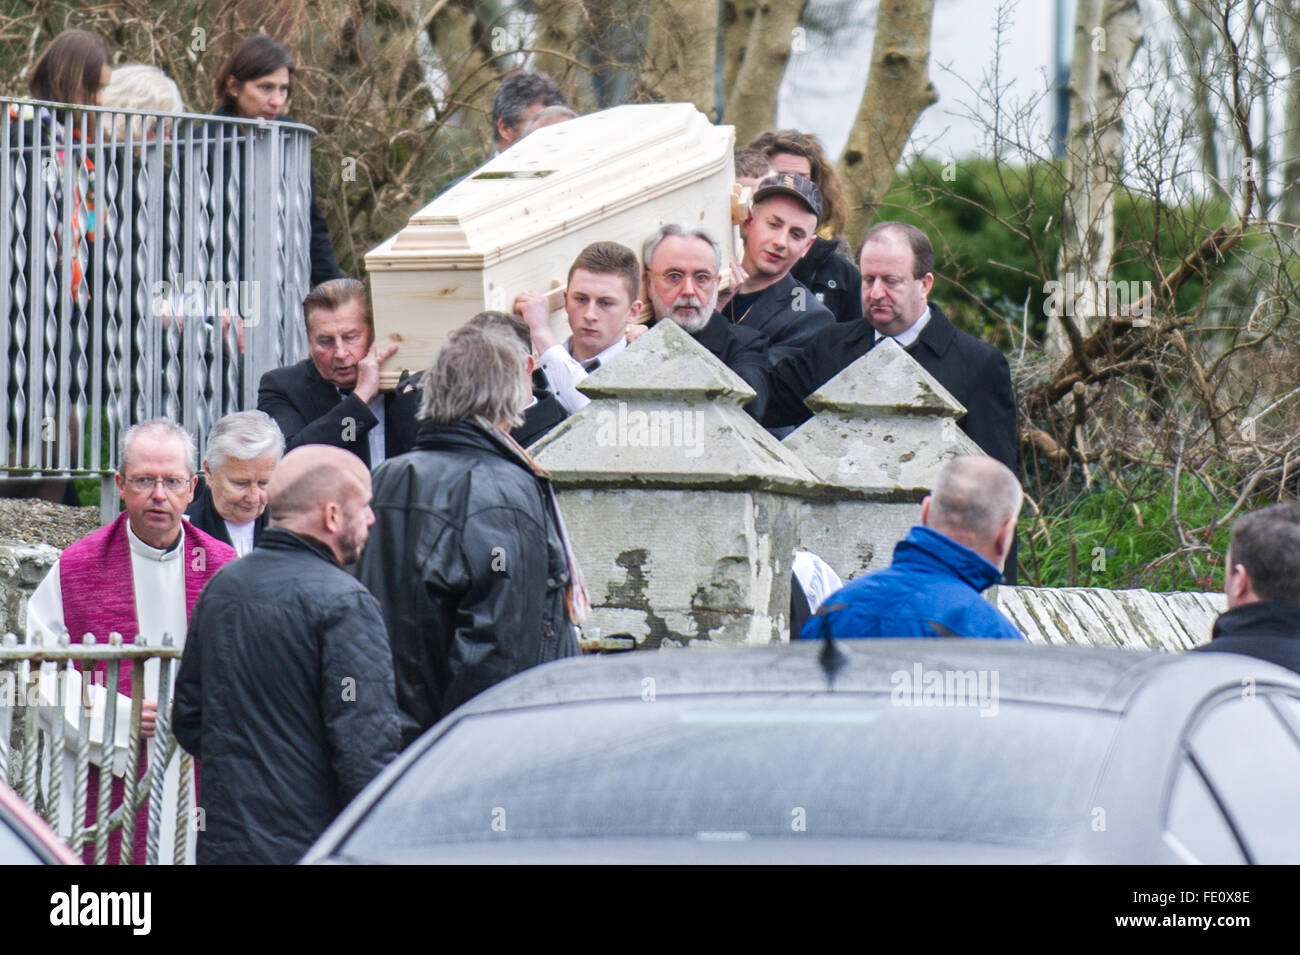 Schull, Ireland. 3rd February, 2016. Colin Vearncombe, aka 'Black' is shouldered from Holy Trinity Church, Schull by, amongst others, two of his sons and his manager, Steve Baker. He was carried to St. Mary's Church before leaving to await cremation on 4th February, 2016. Credit: Andy Gibson/Alamy Live News. Stock Photo